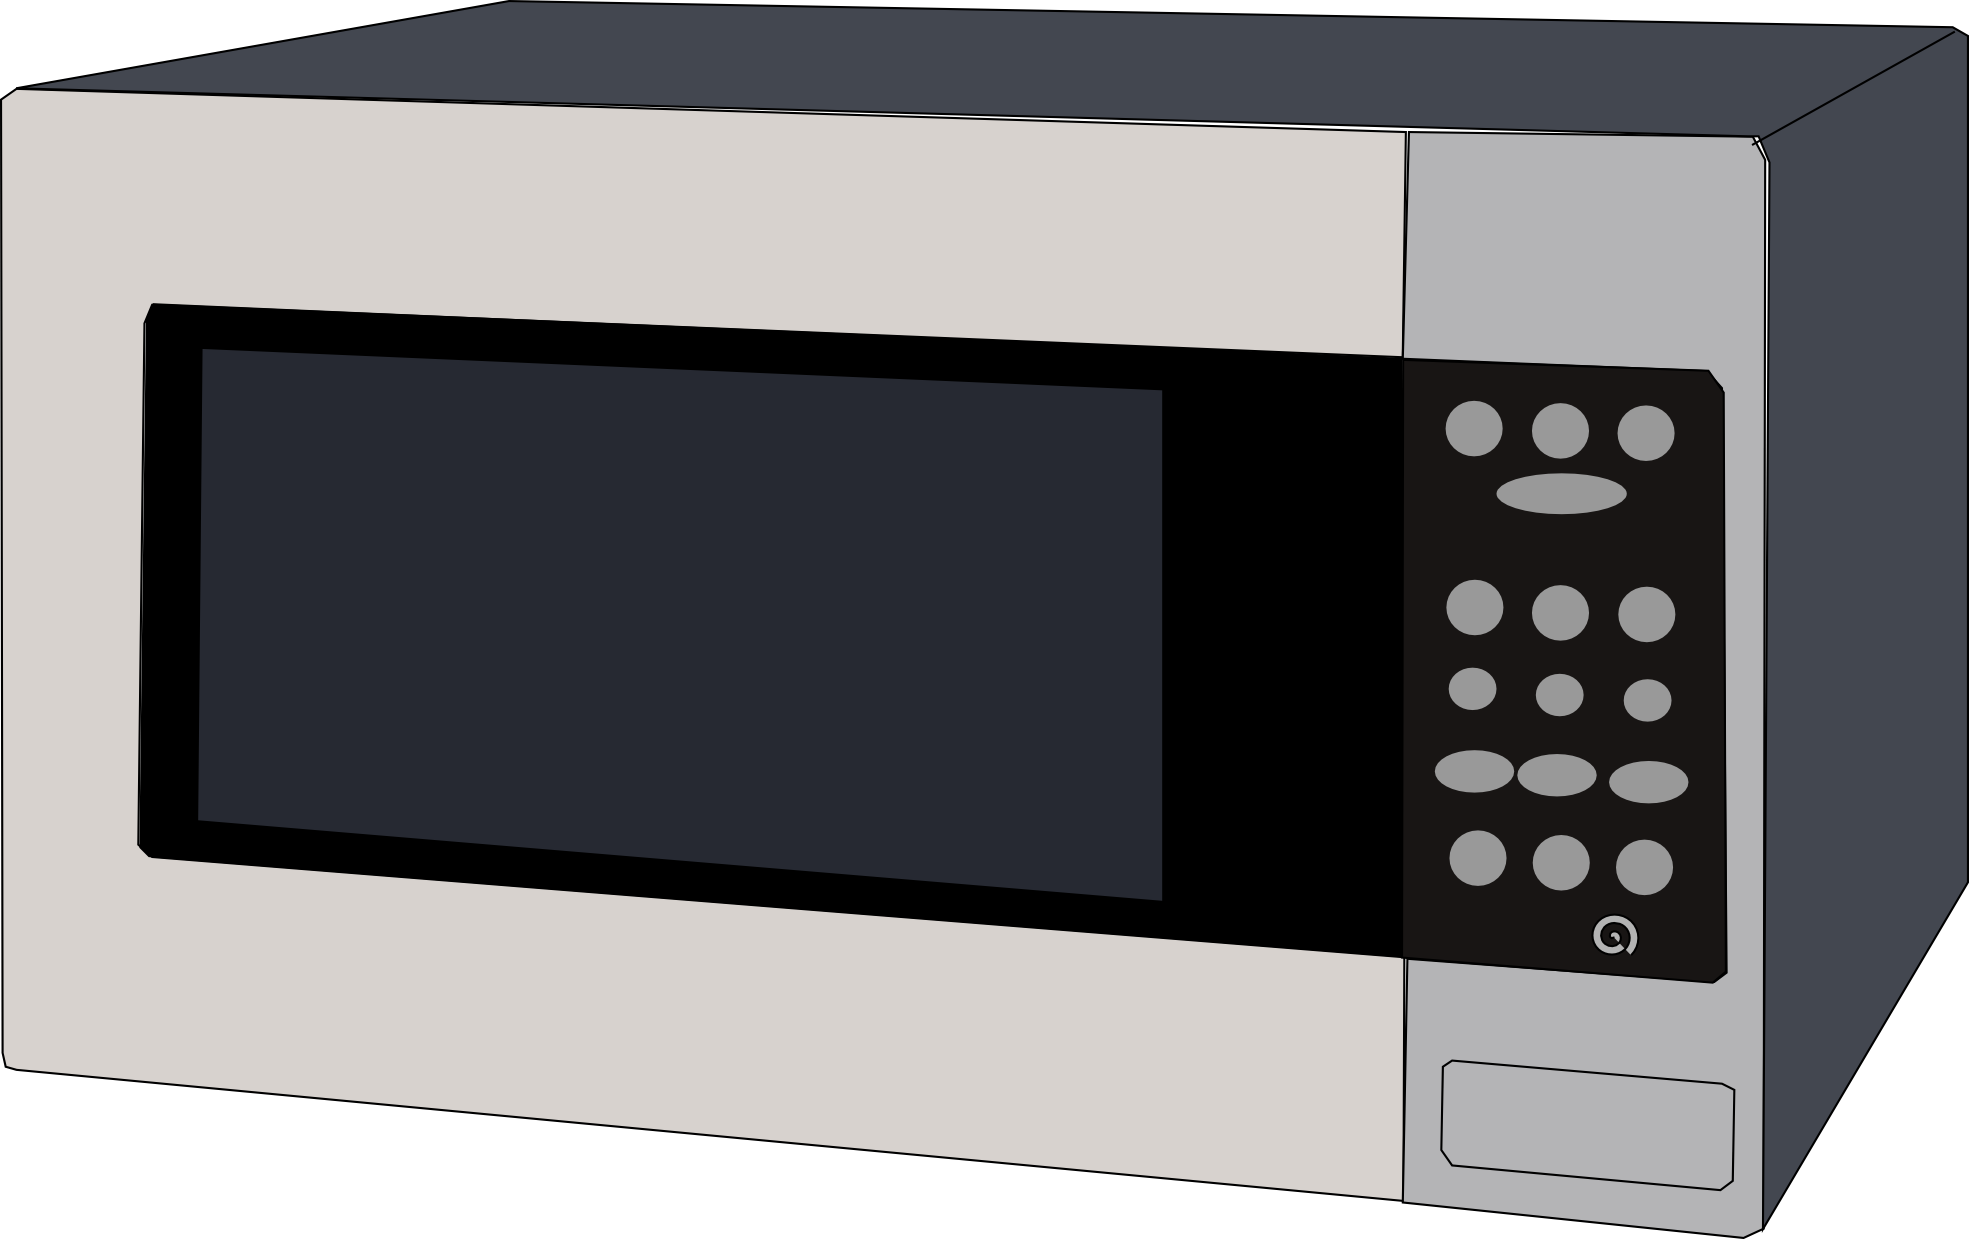 Microwave oven clipart free 